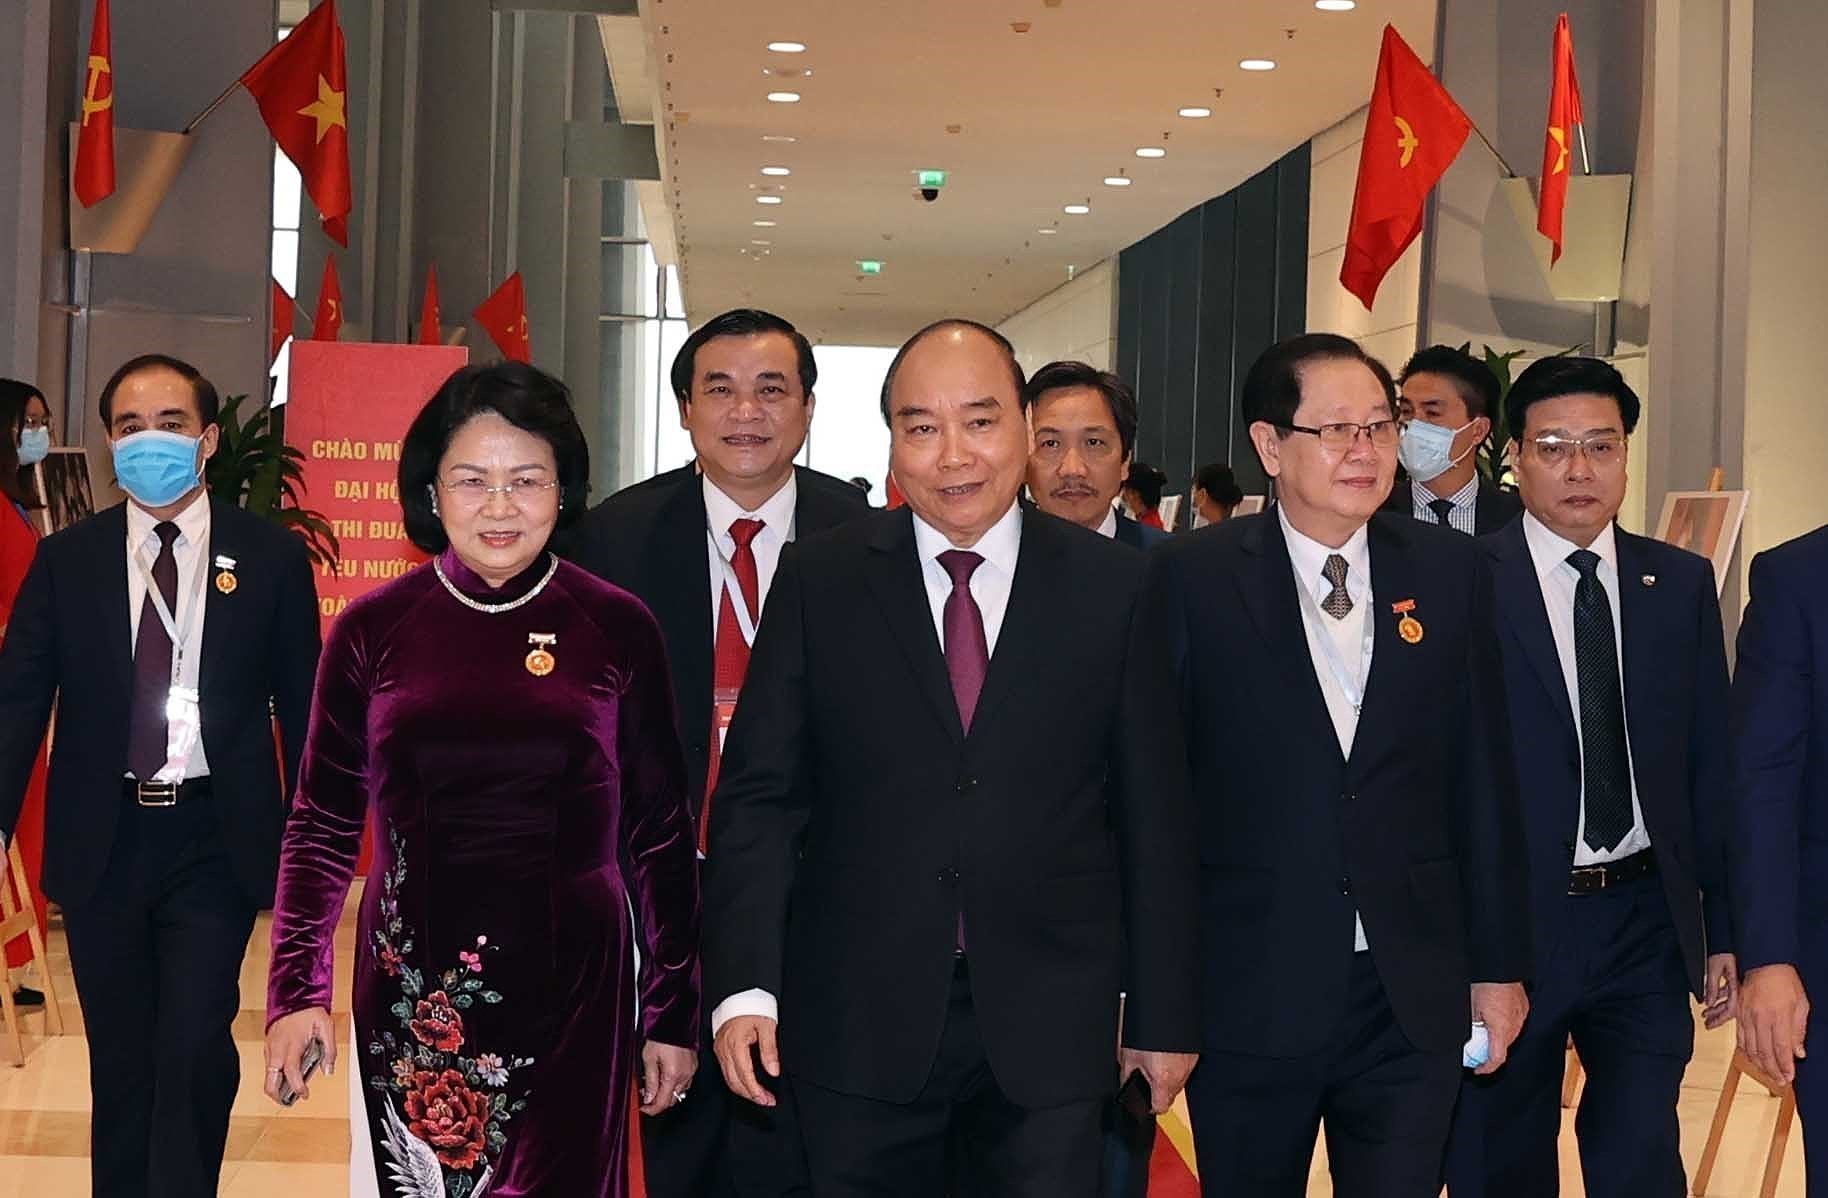 10th National Patriotic Emulation Congress opens in Hanoi hinh anh 2